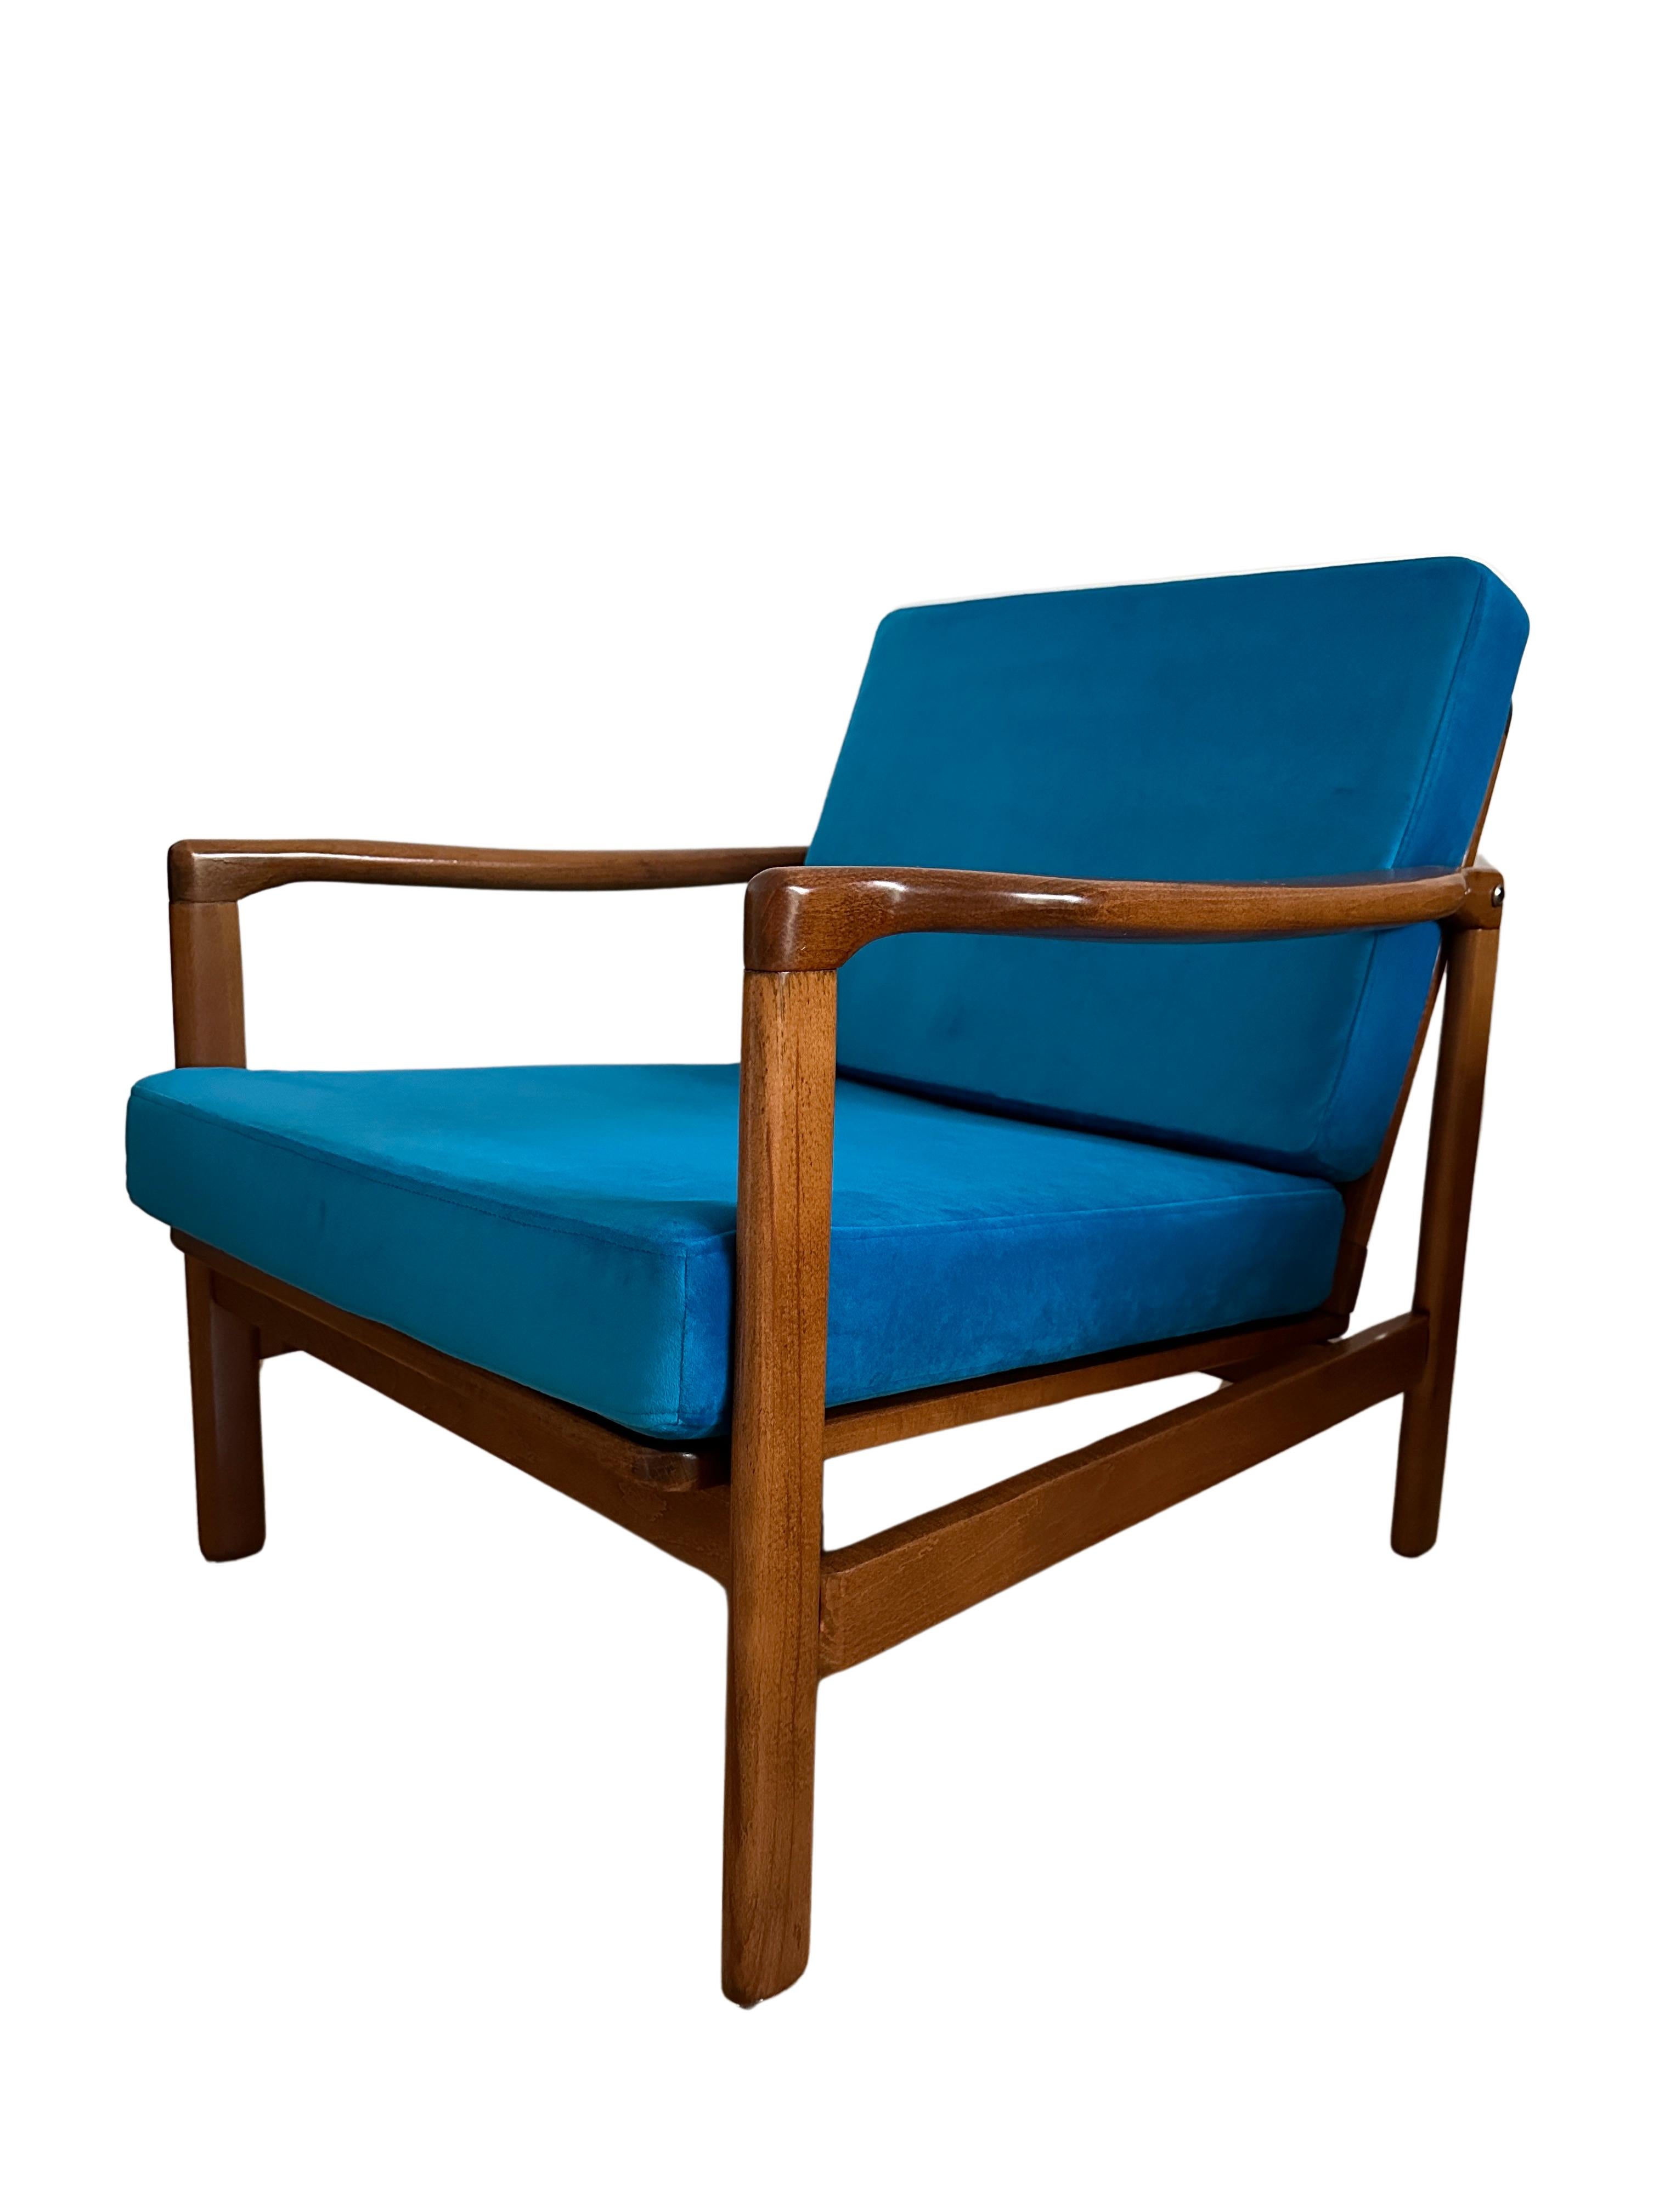 Set of Two Midcentury Armchairs, Blue Velvet Upholstery, Poland, 1960s For Sale 1